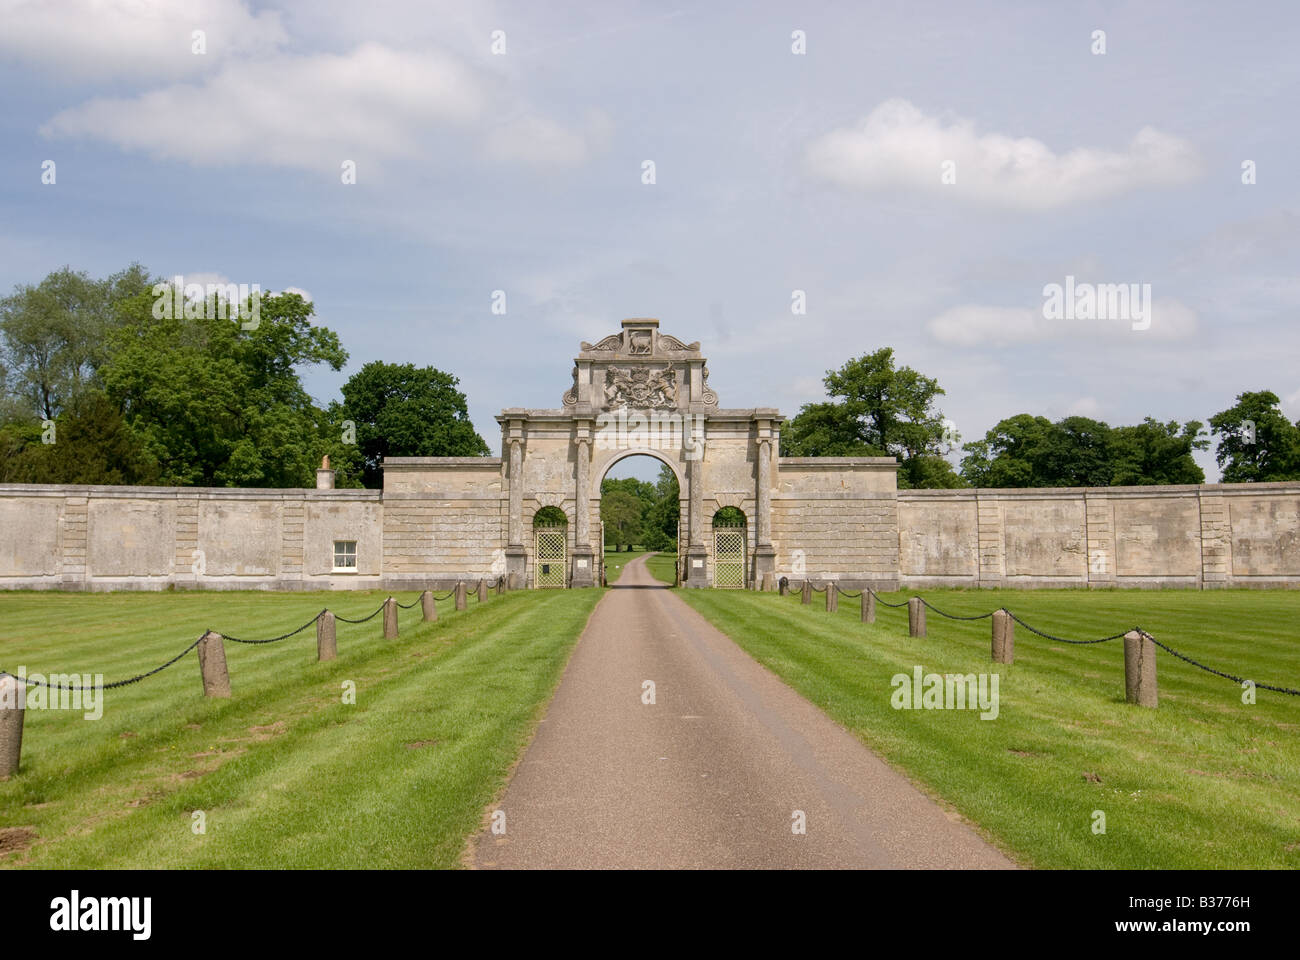 Woburn Park estate wall and gate Stock Photo